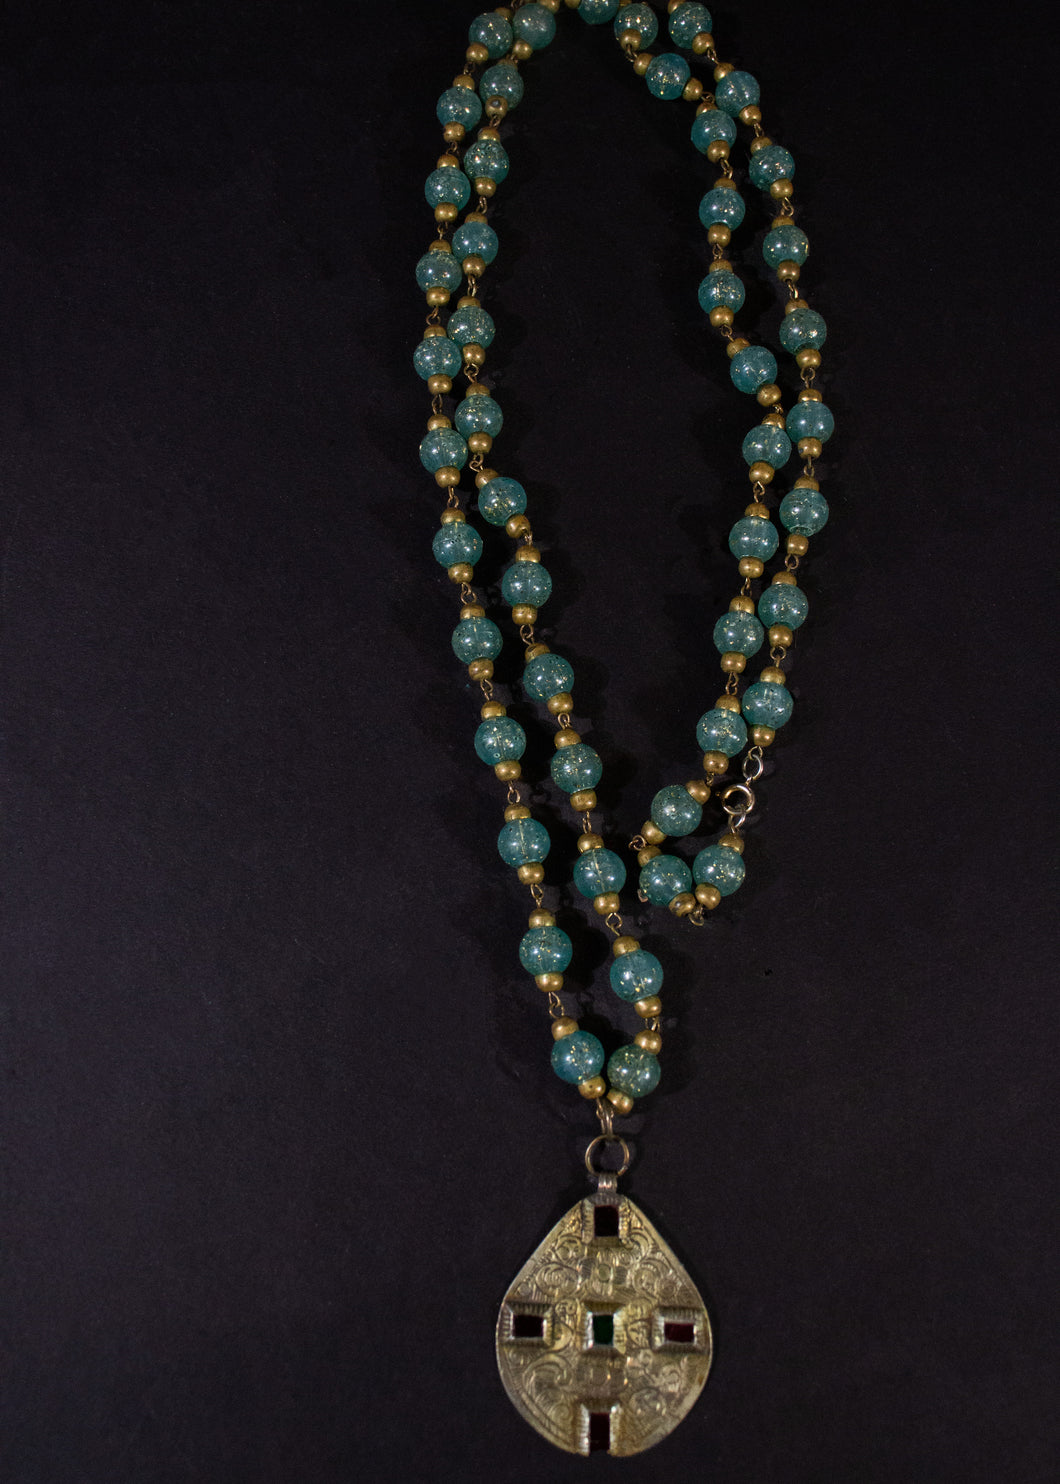 Venetian Bead Necklace with Moroccan Vermeil Charm